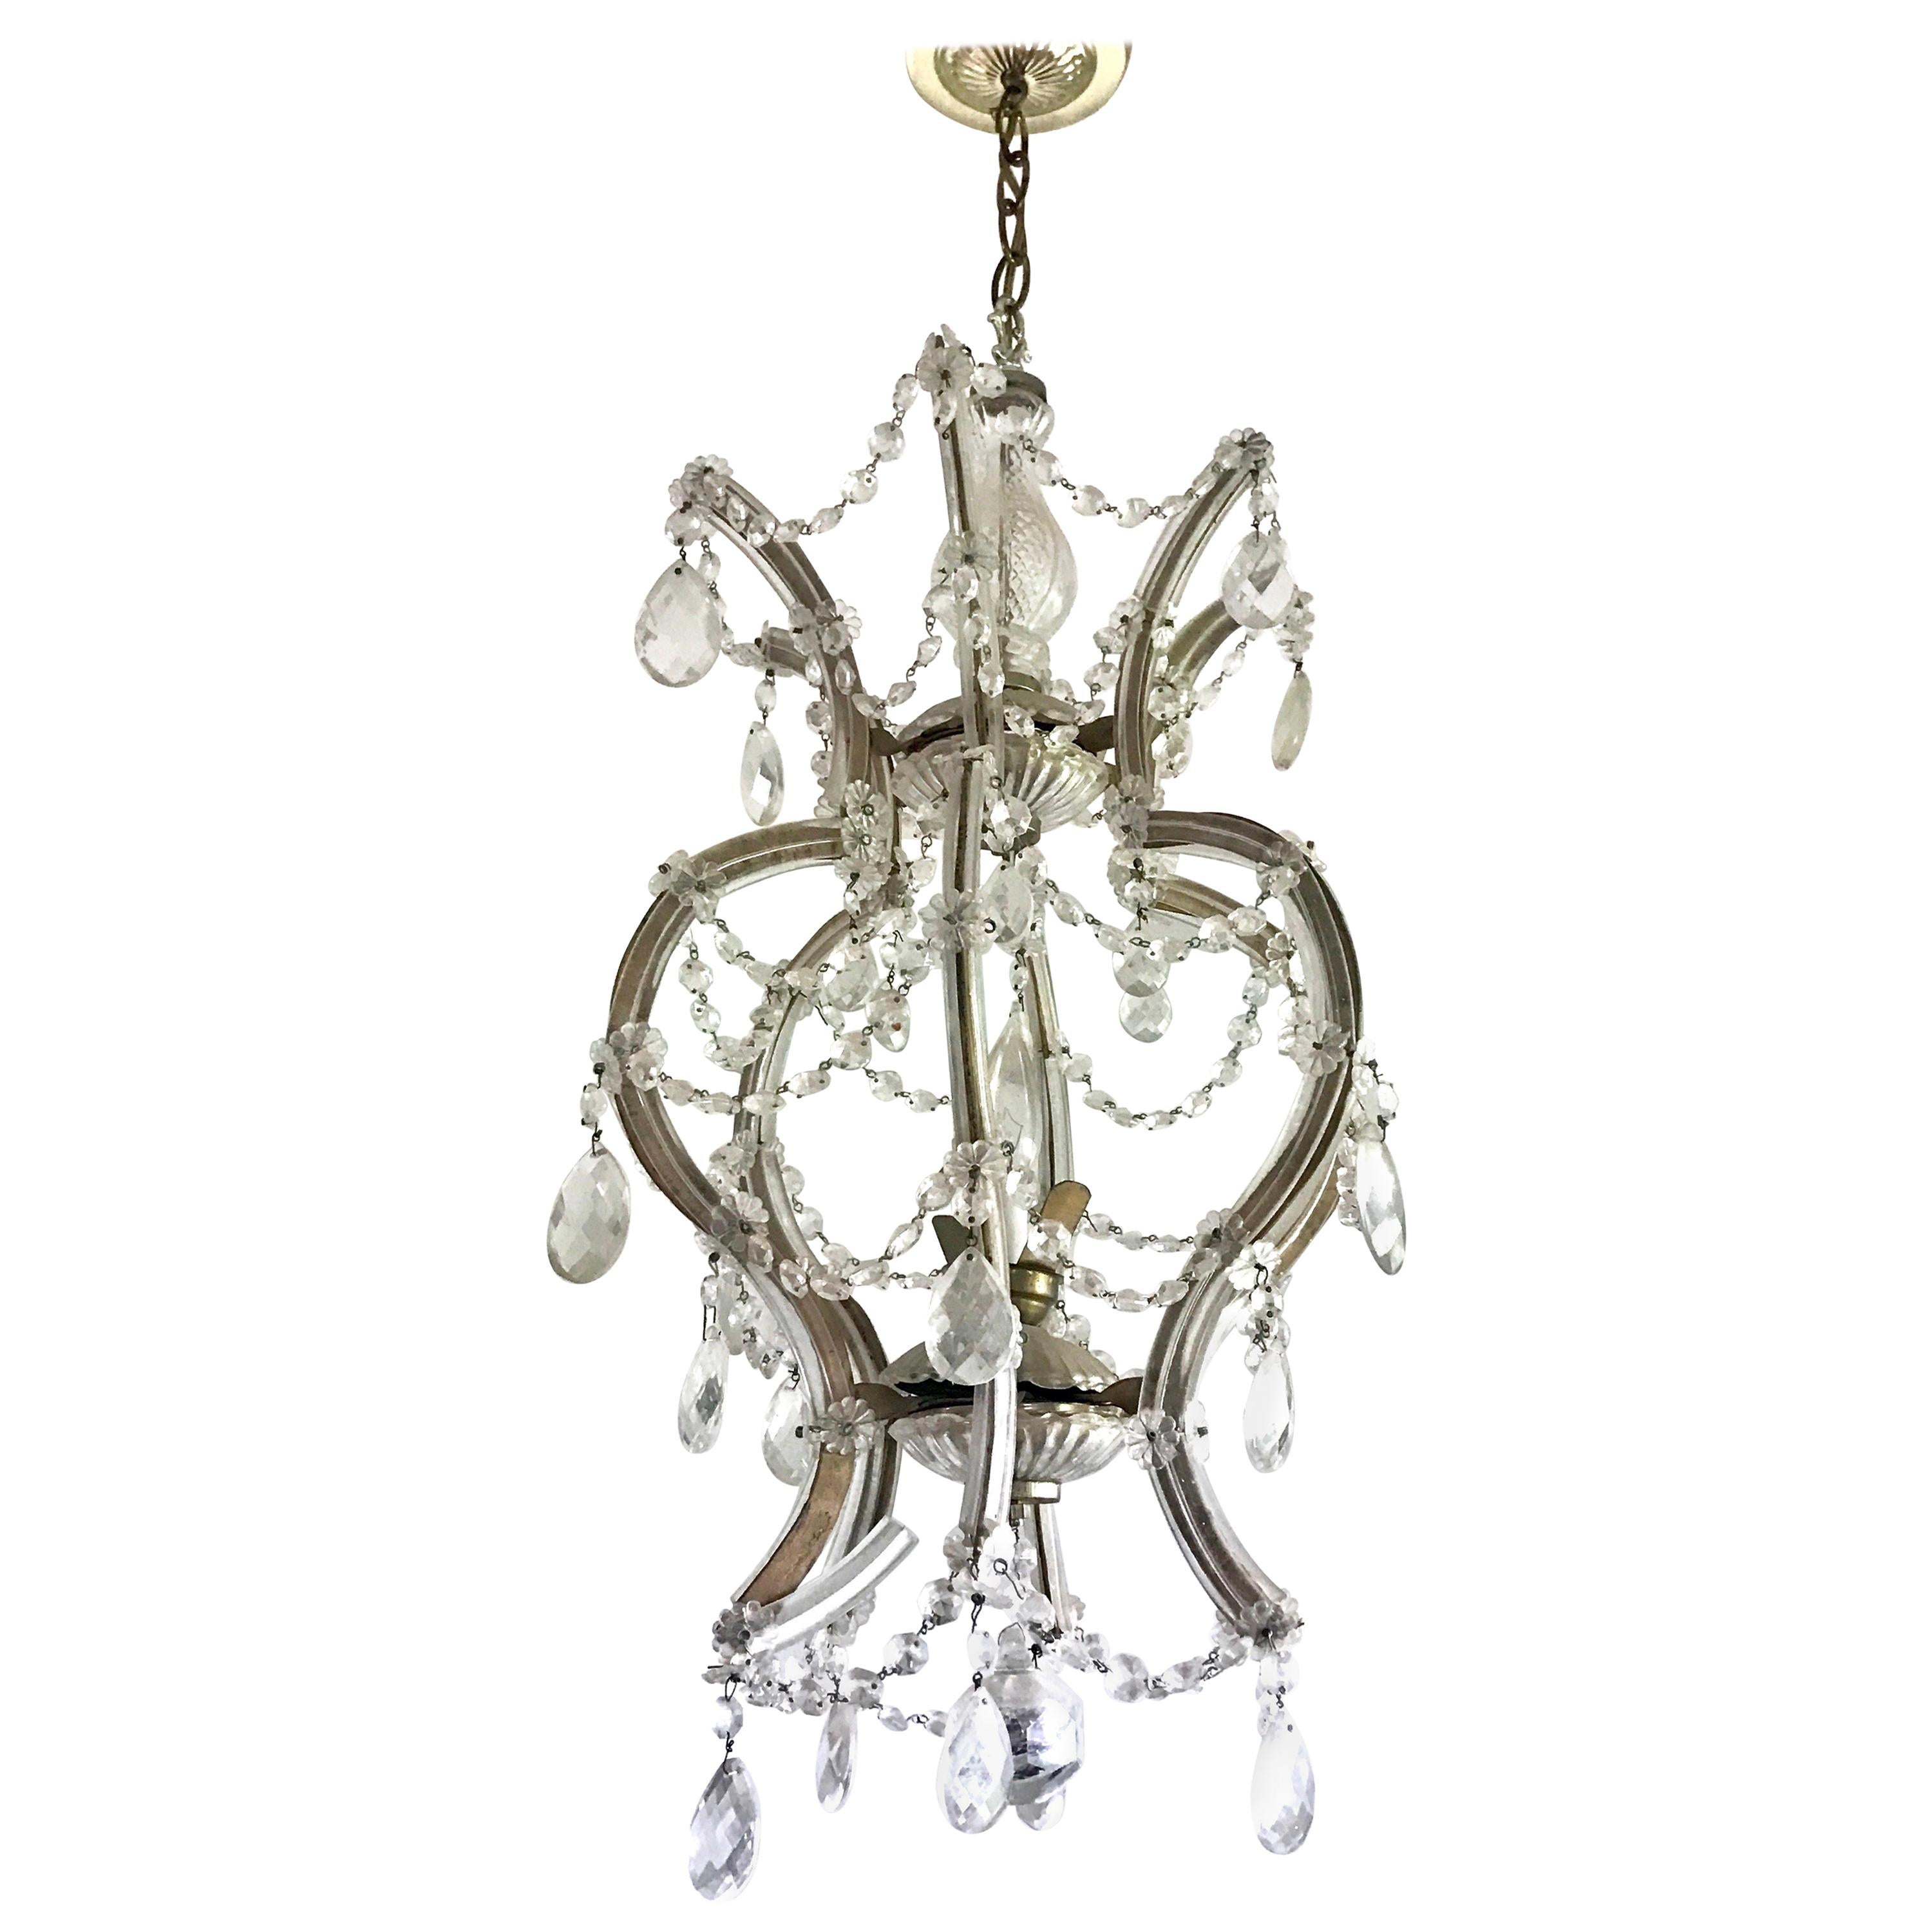 Maria Theresa Crystal Chandelier Made in Italy